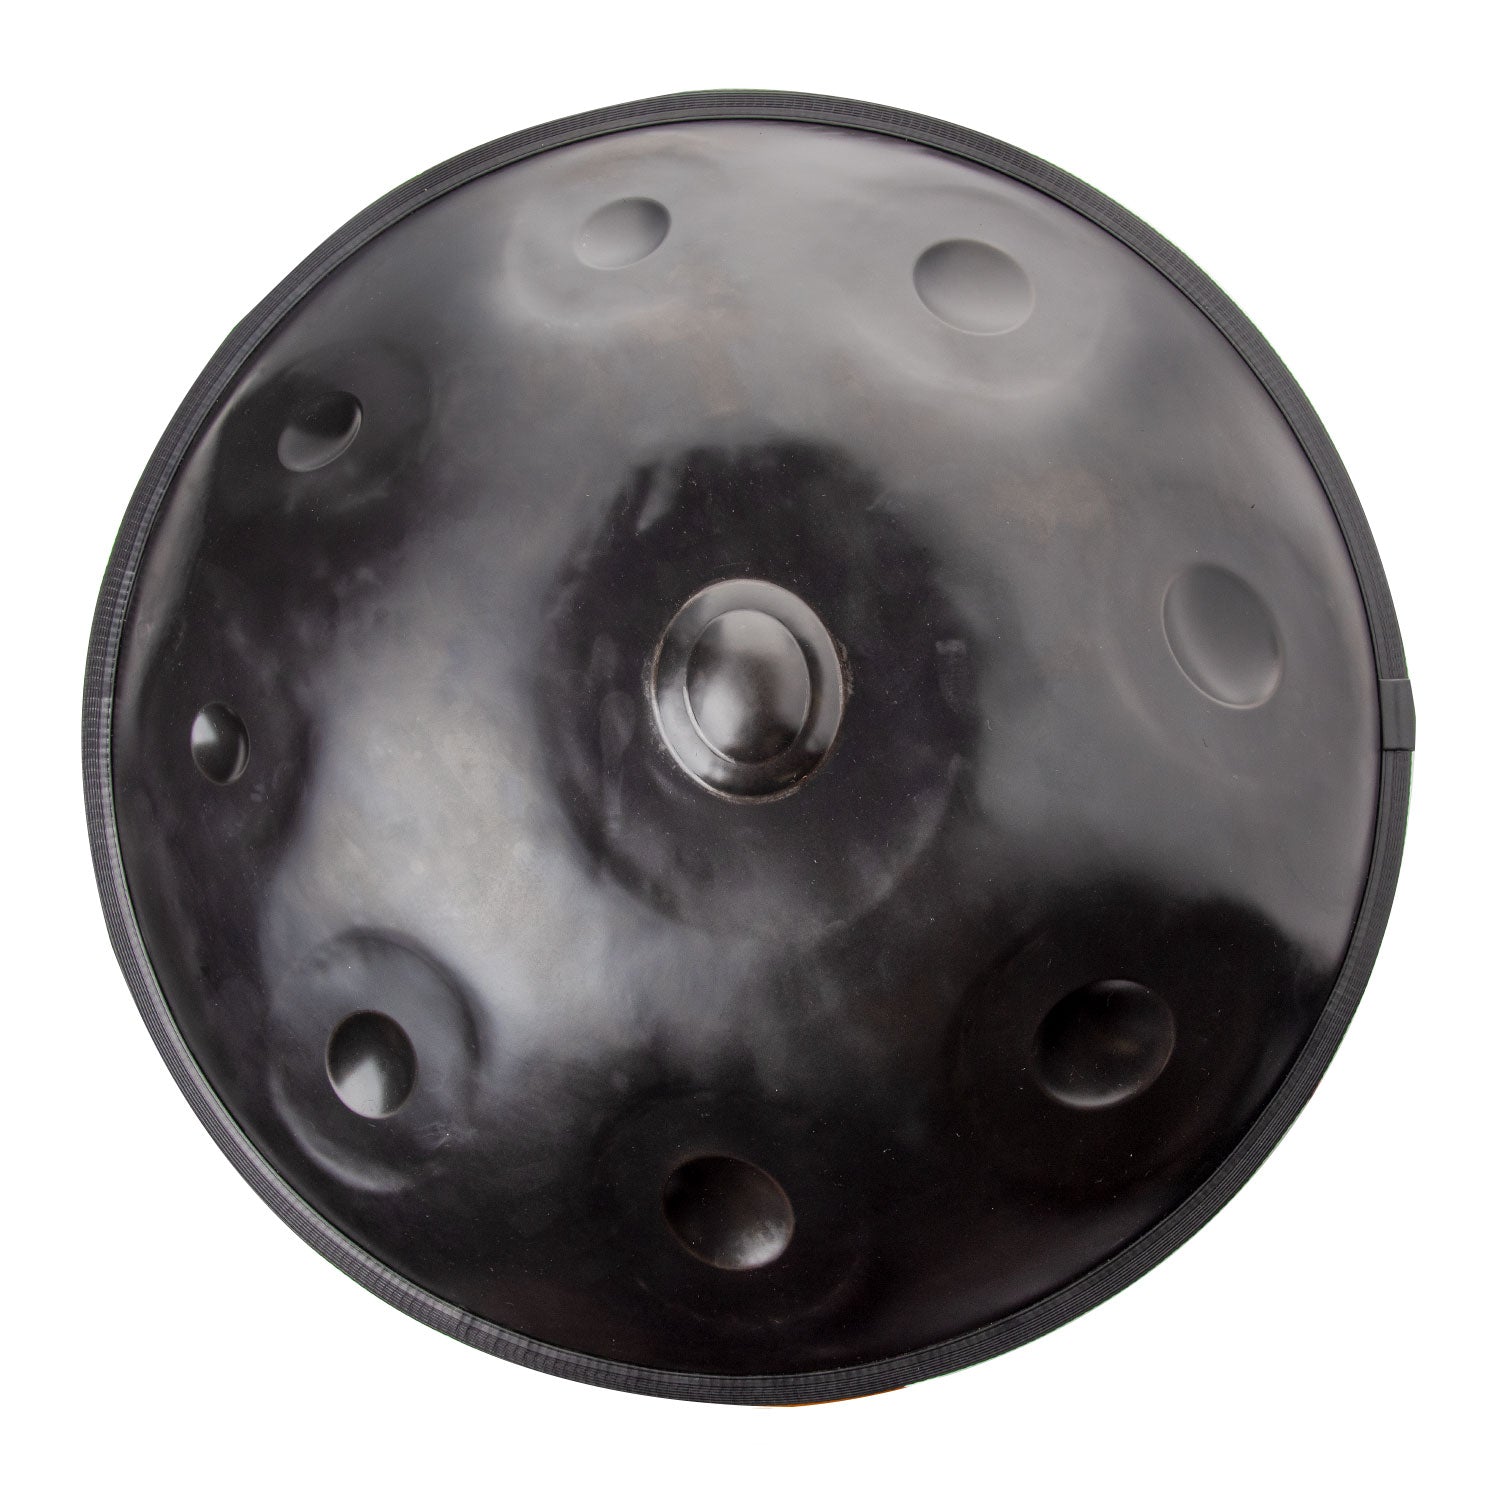 Handpan drum instrument in D Minor 9 Notes 22 inches